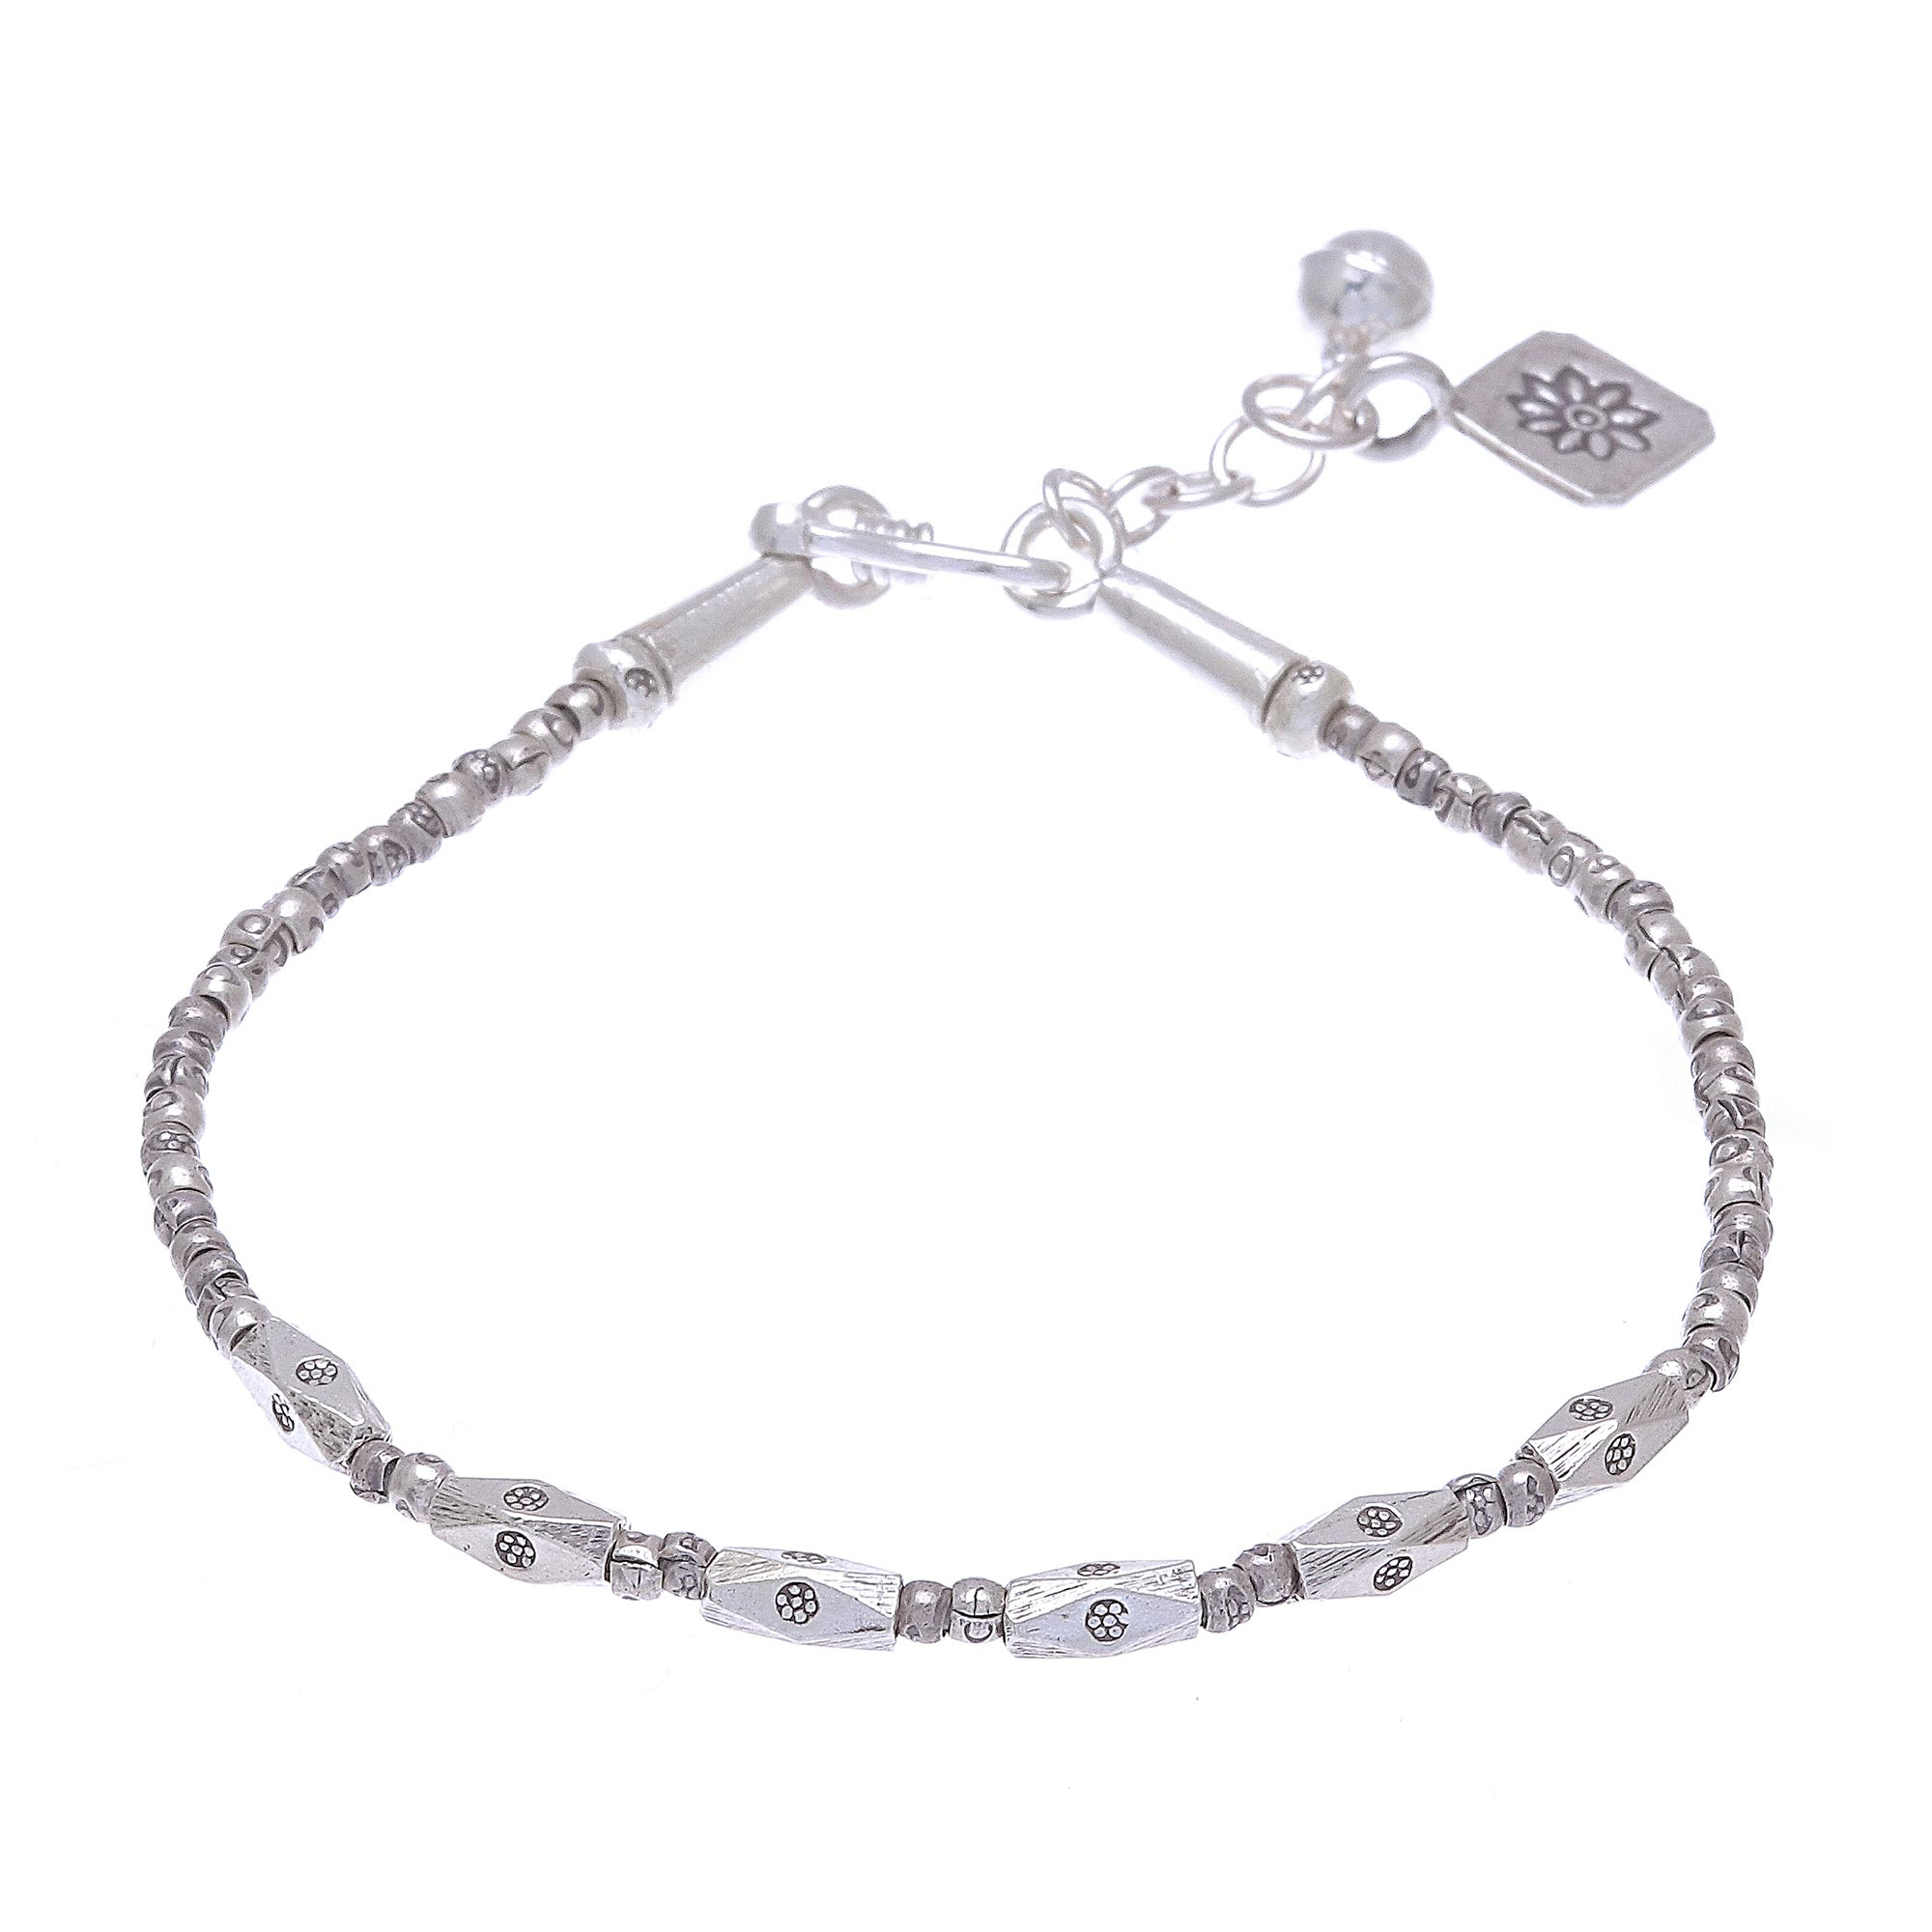 Hill Tribe Silver Beaded Bracelet Crafted in Thailand - Voice of the ...